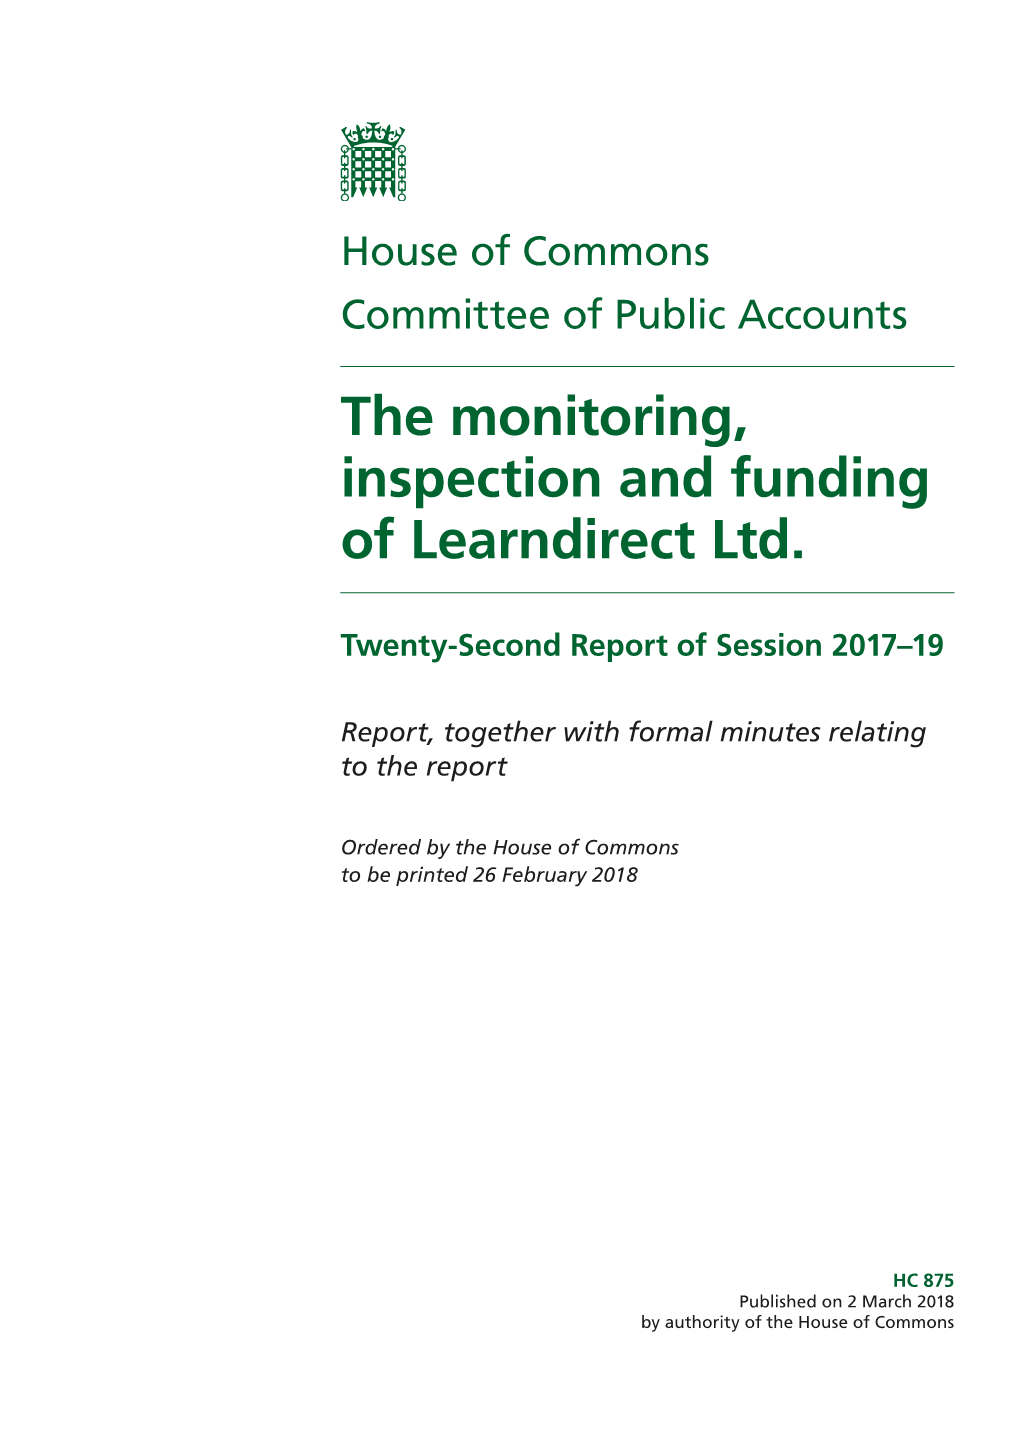 The Monitoring, Inspection and Funding of Learndirect Ltd